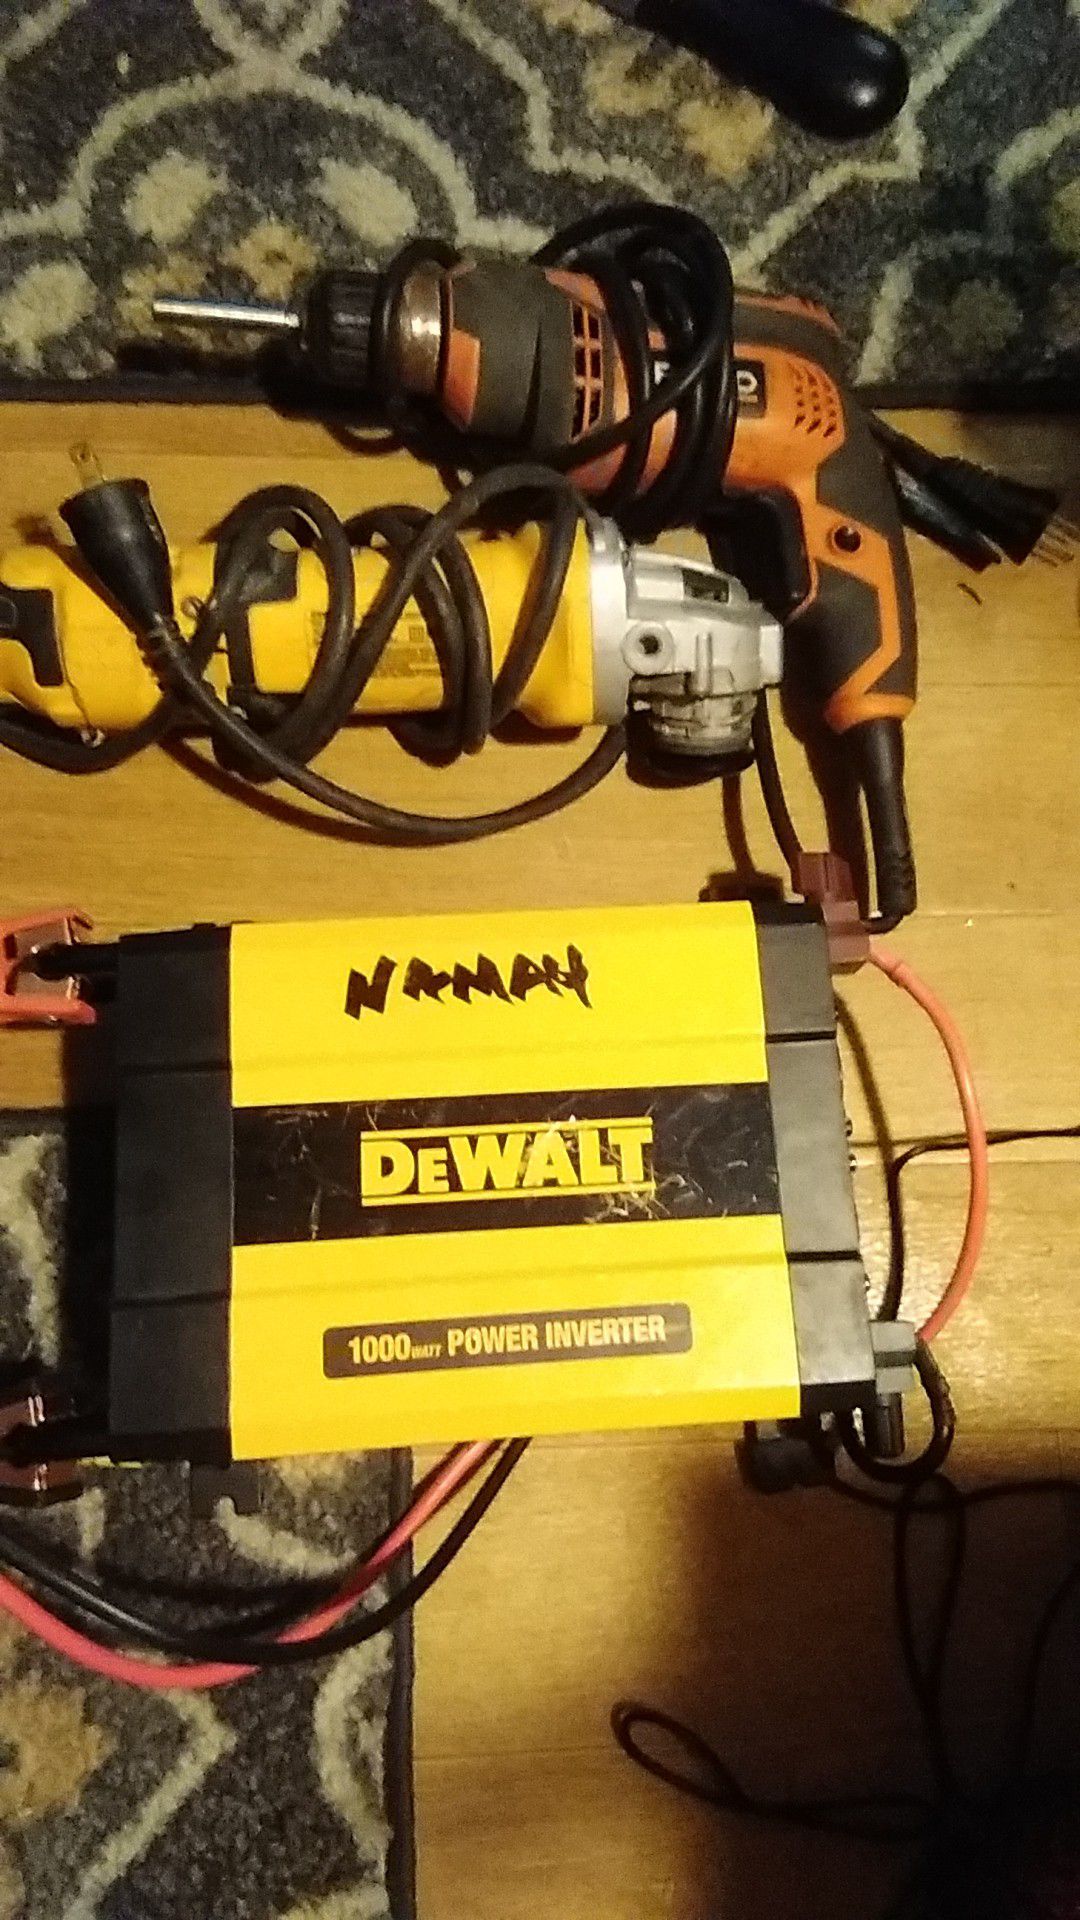 DeWalt corded angle grinder and Ridgid coreded drill both for 60.00 cash and a DeWalt power inverter 1000w 40 cash I'll take 85 for 3 or 40 a piece